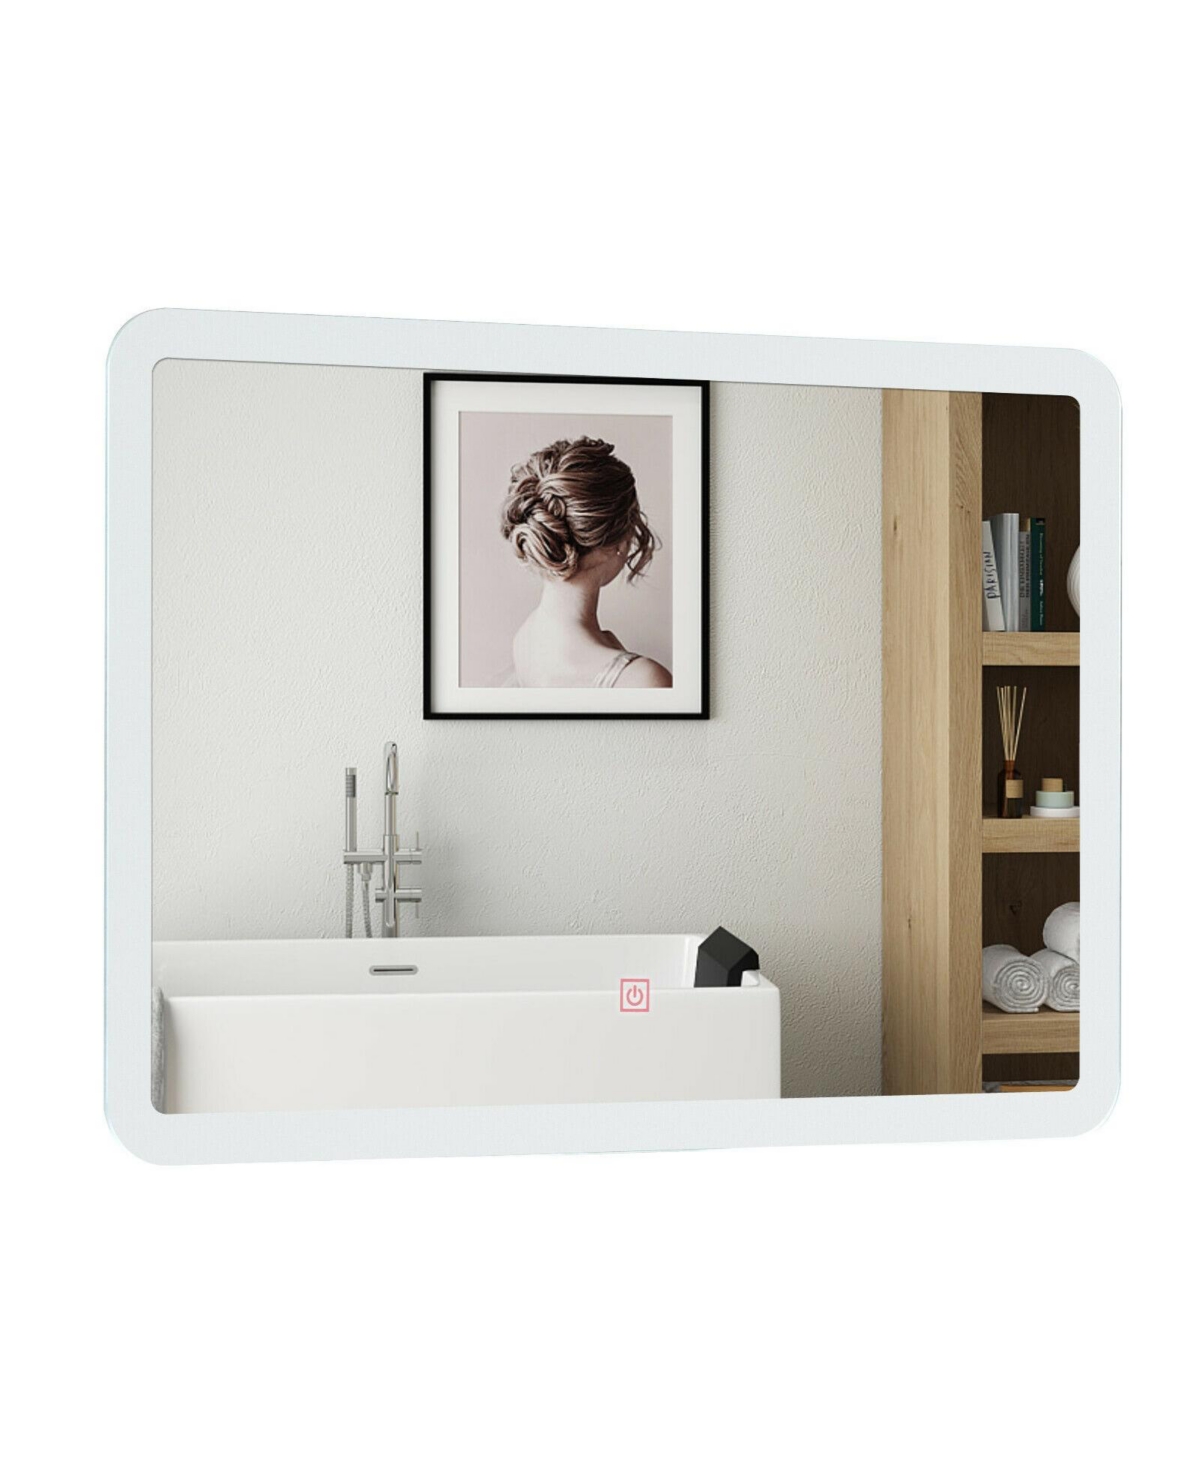 Led Wall-mounted Bathroom Rounded Arc Corner Mirror with Touch - White